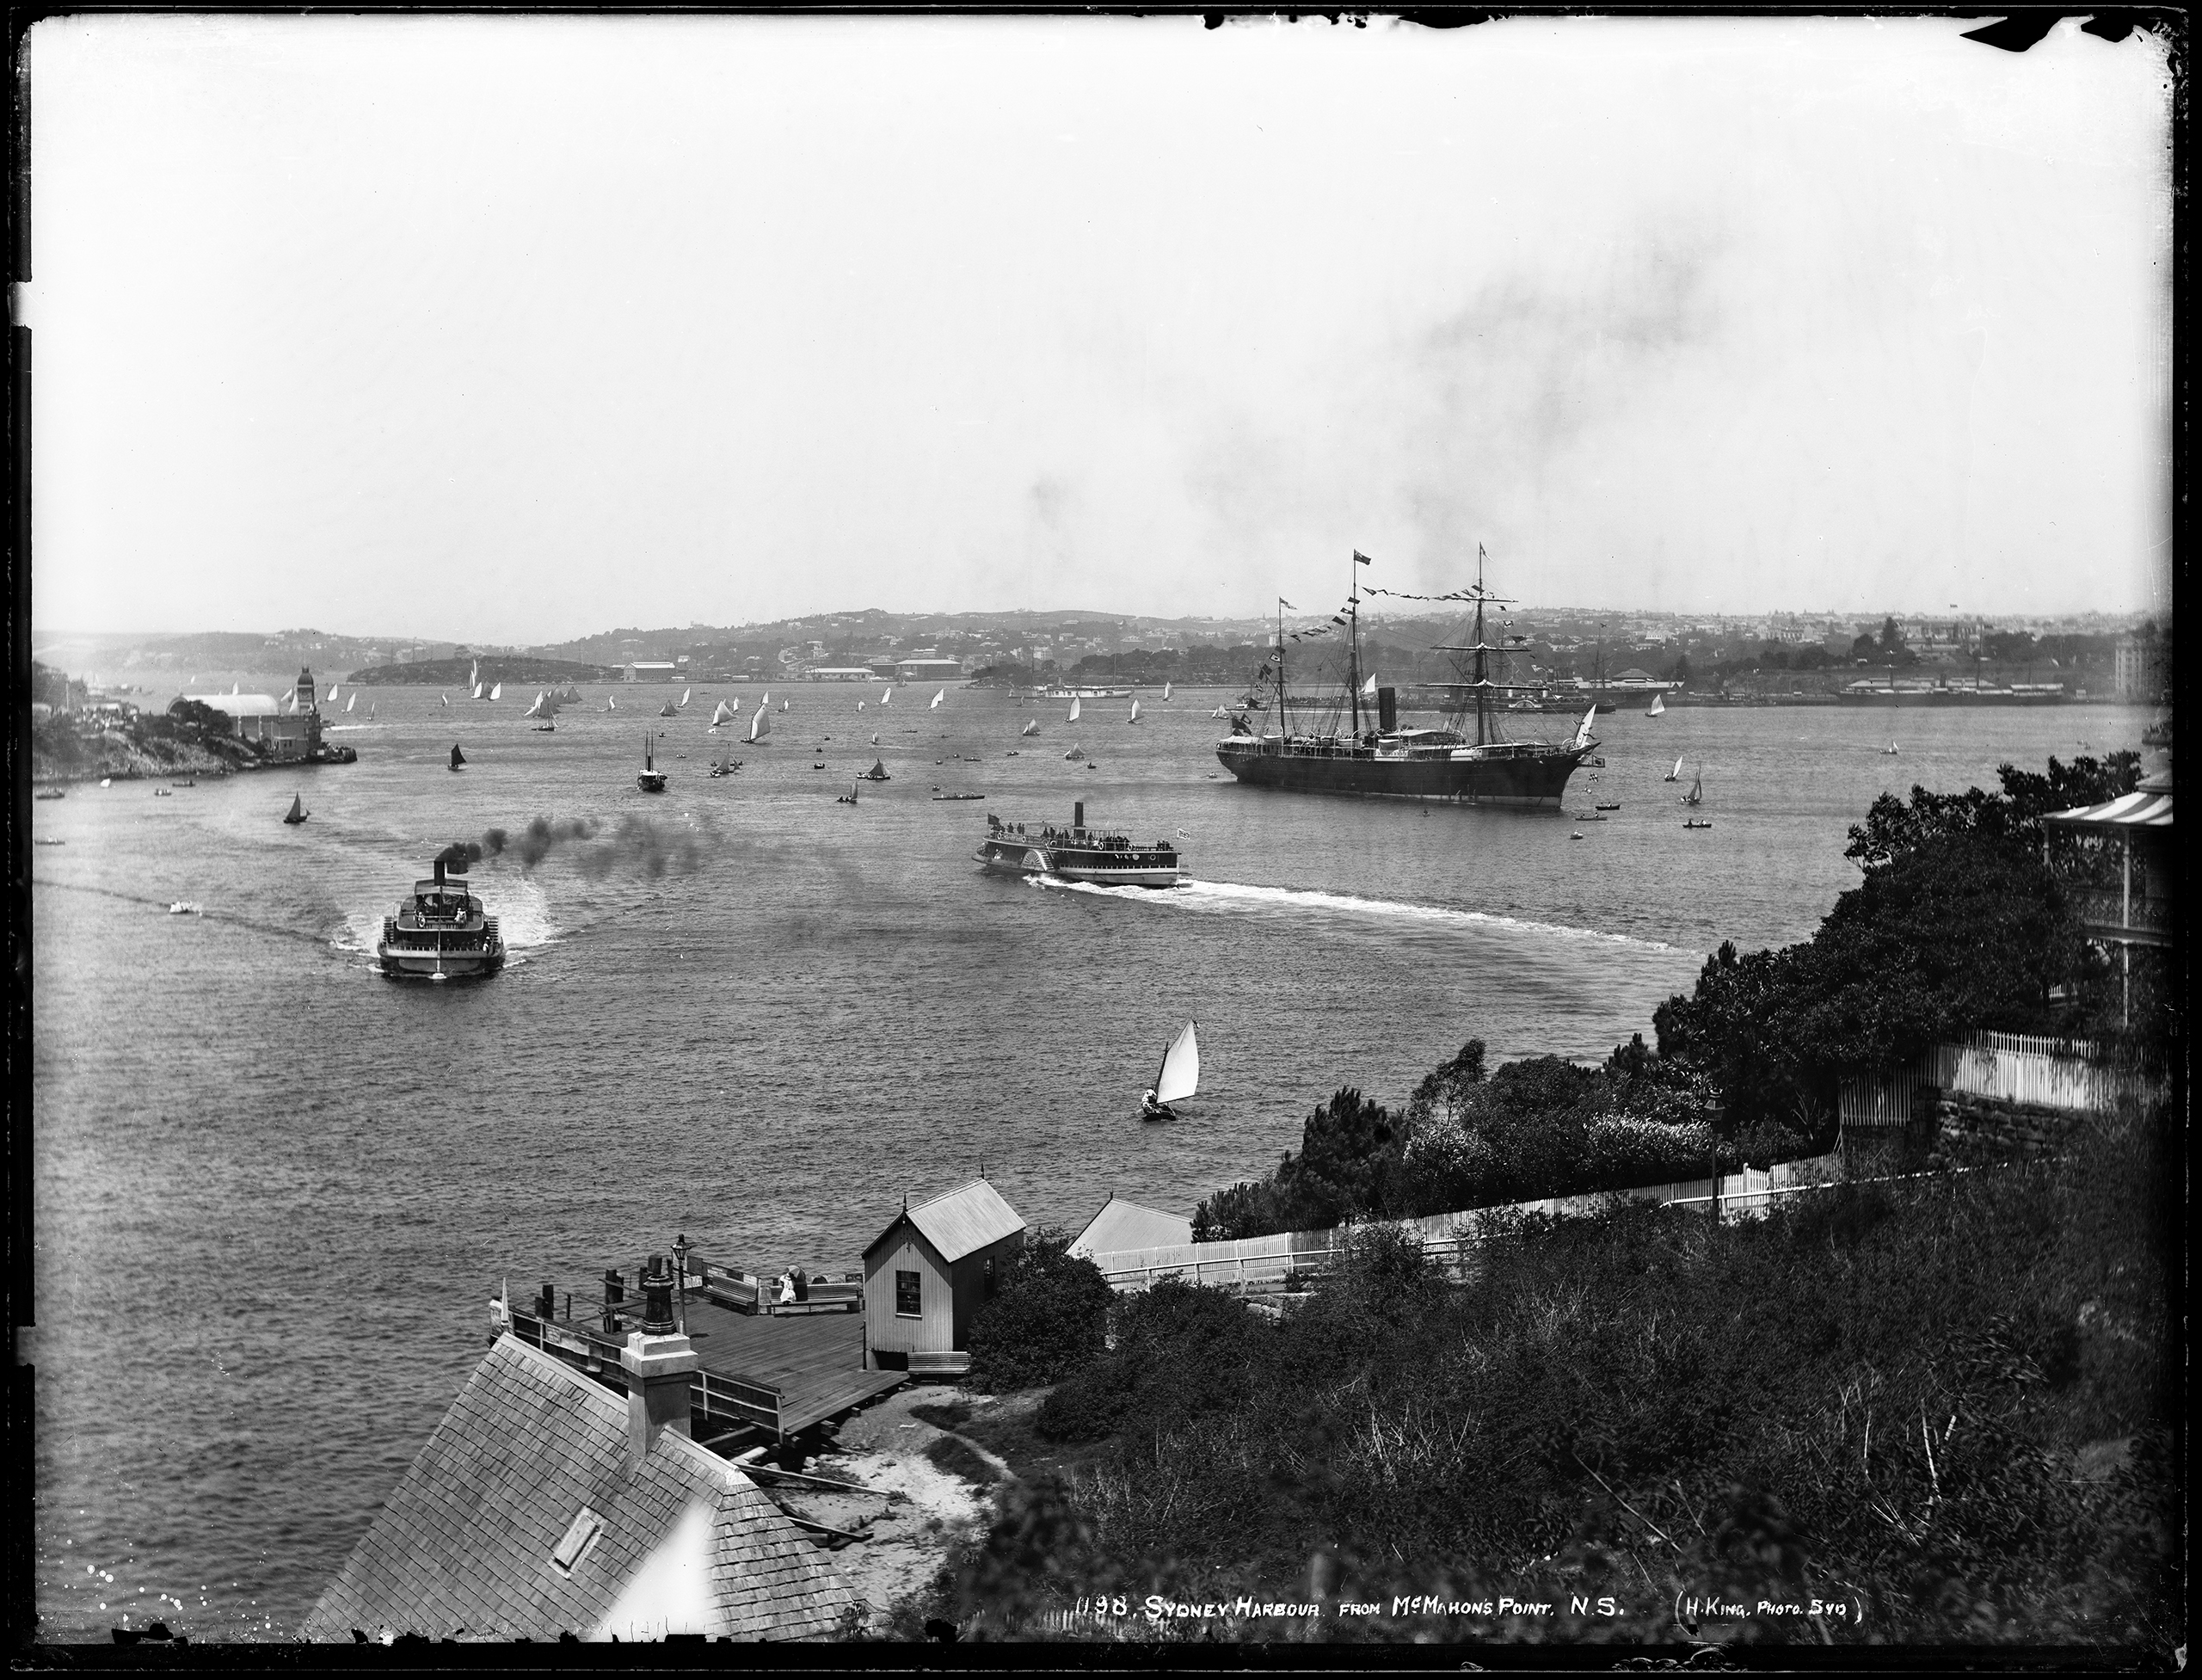 Glass plate negative of Sydney Harbour from McMahons Point, 1885-1893